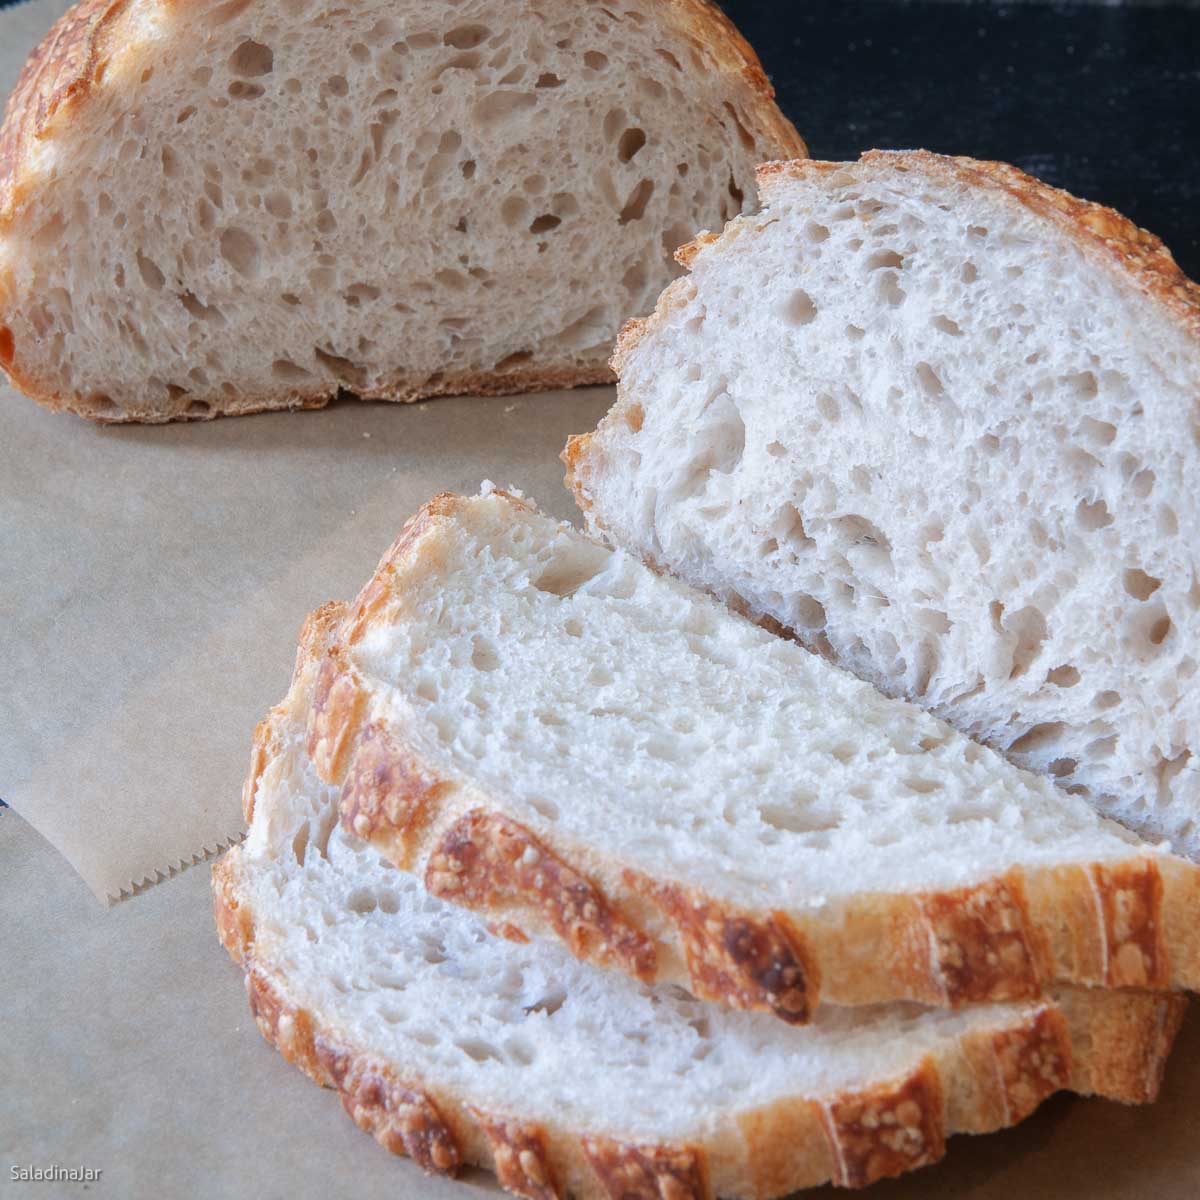 Can traditional sourdough be produced on a mass scale?